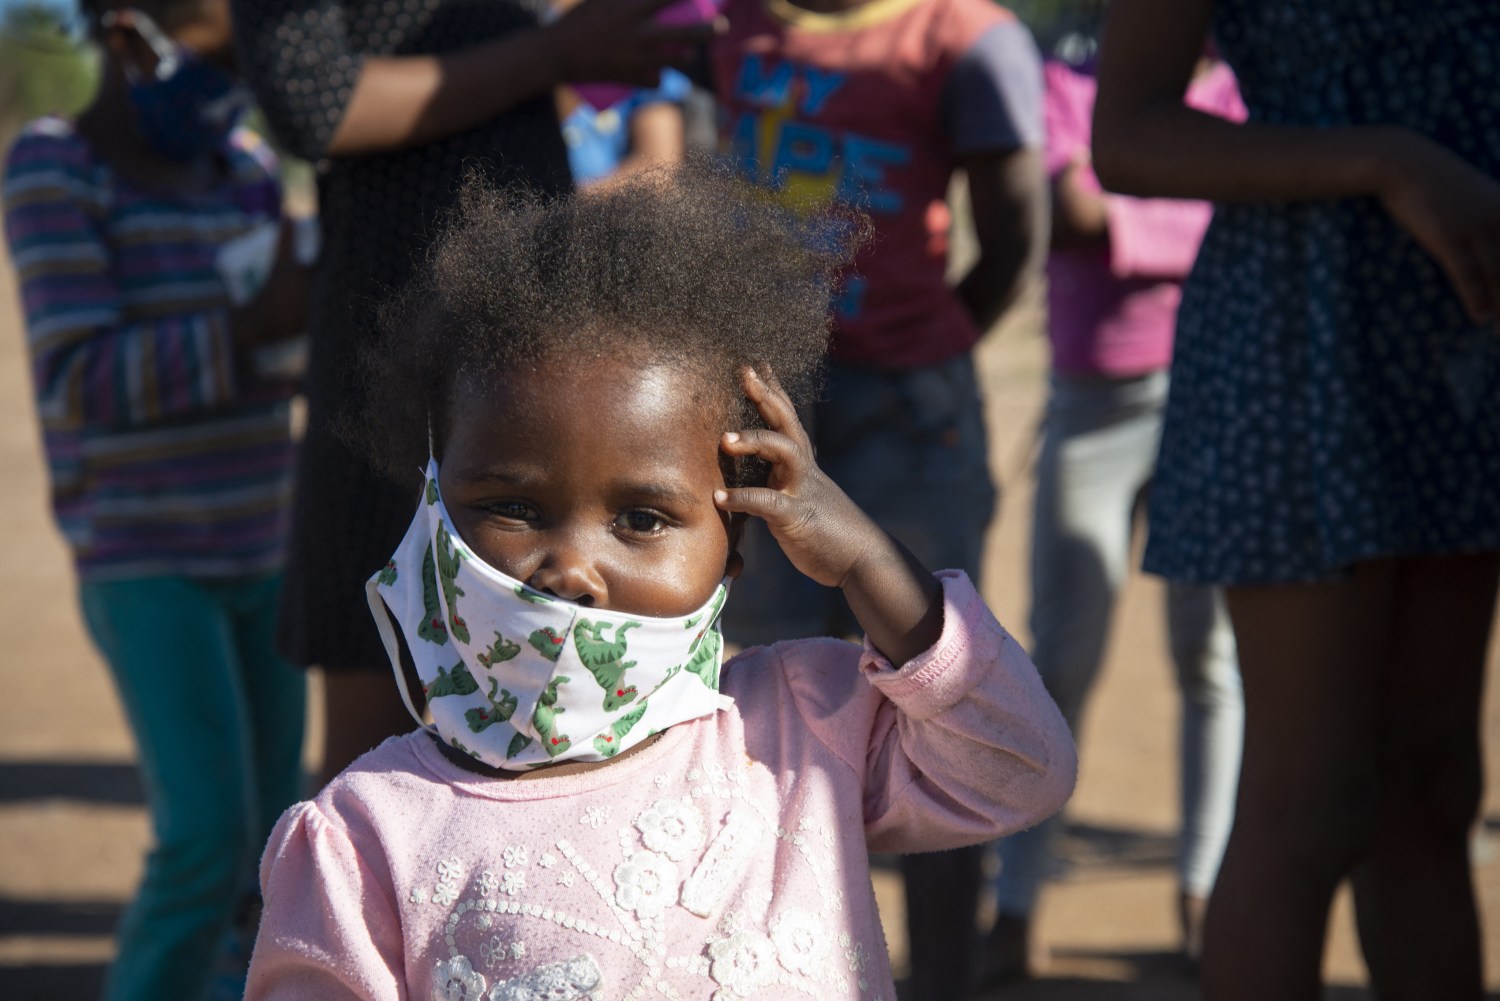 A small child wearing a facemask is seen at a volunteer food drive in Mountain View, an informal settlement in Jamestown, located in the Cape Winelands District, on Saturday, May 29, 2020. It's estimated that most, if not all, of the households here had no income, due to unemployement during lockdown. Cape Winelands is one of the districts in the Western Cape that has been designated a hotspot area, in terms of people testing positive for COVID-19. When South Africa moves down to Stage 3 of the nationwide lockdown on June 1st, hotspots areas will remain under stricter regulation and surveillance, per the latest government announcements. Photo by Eva-Lotta Jansson/RealTime Images/ABACAPRESS.COMNo Use South Africa.